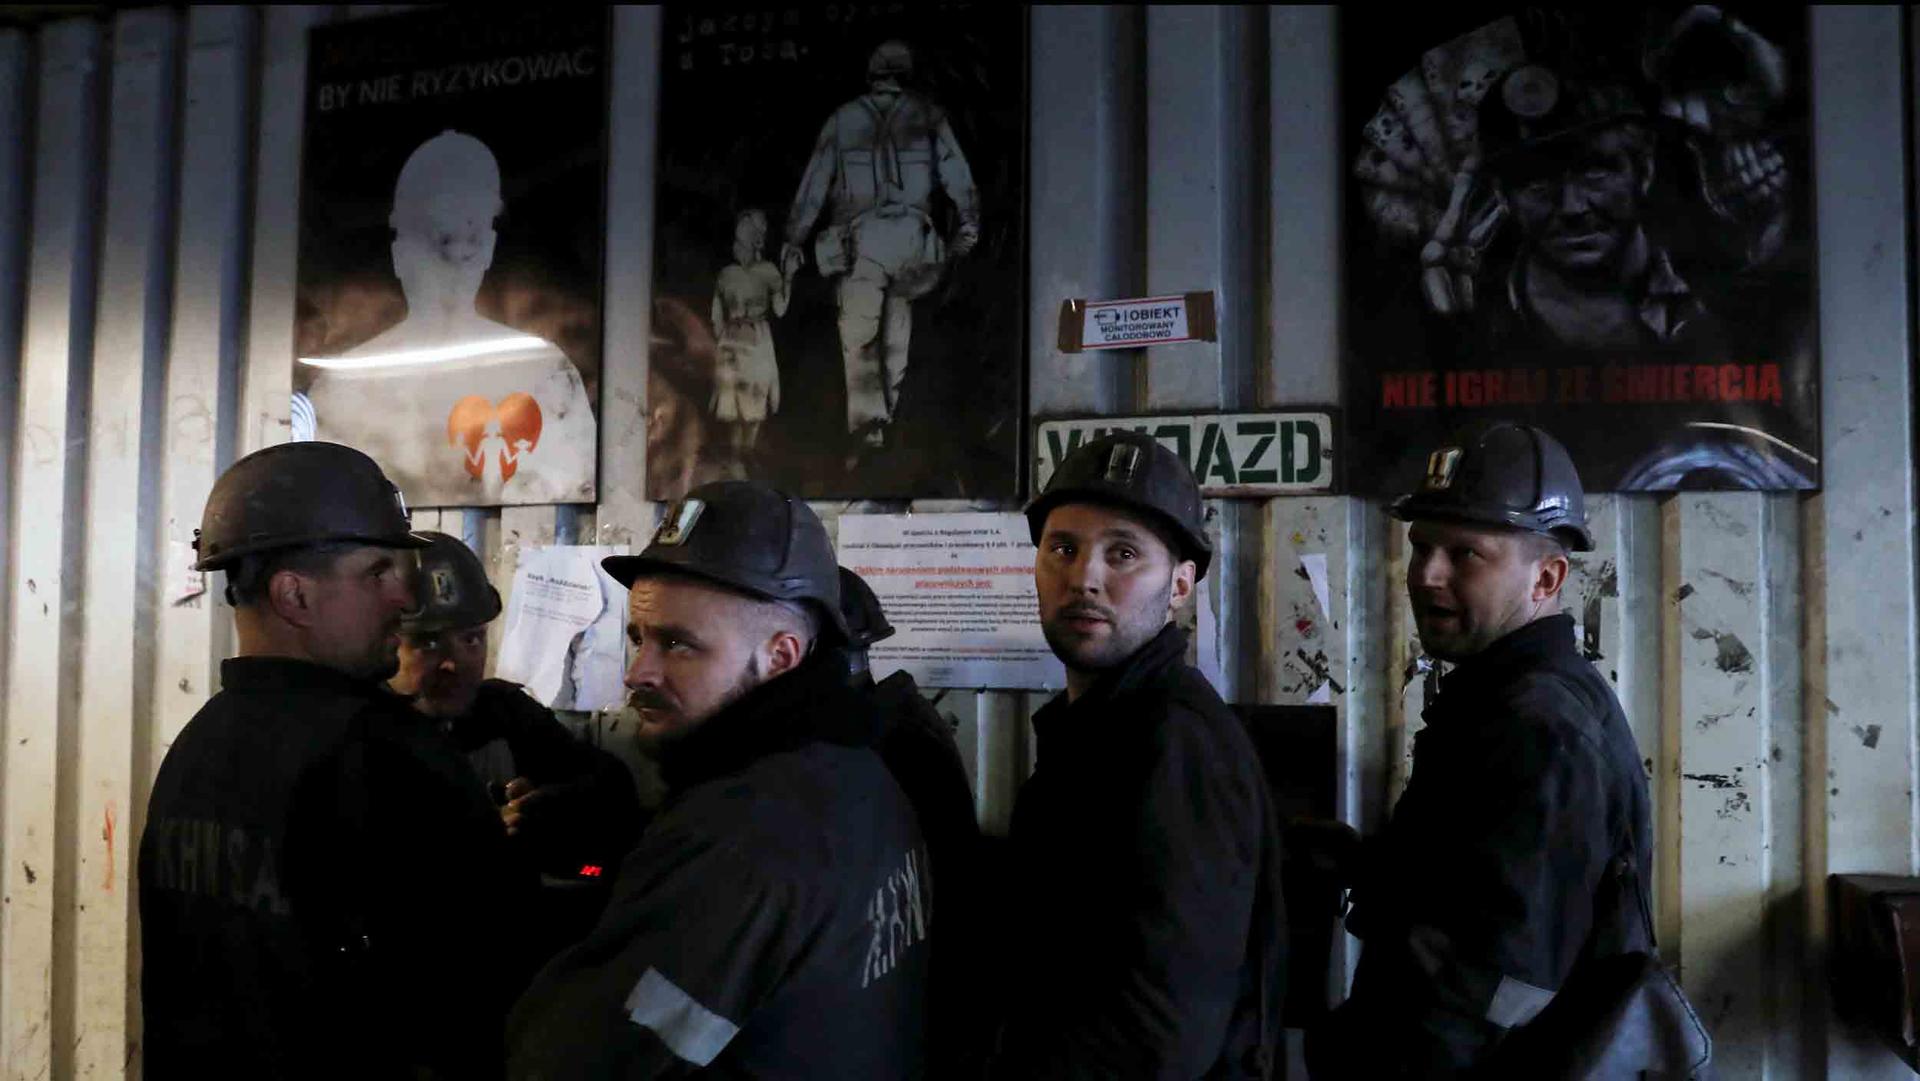 A group of men wearing hard hats and dark grey clothes stand in front of posters depicting miners at work